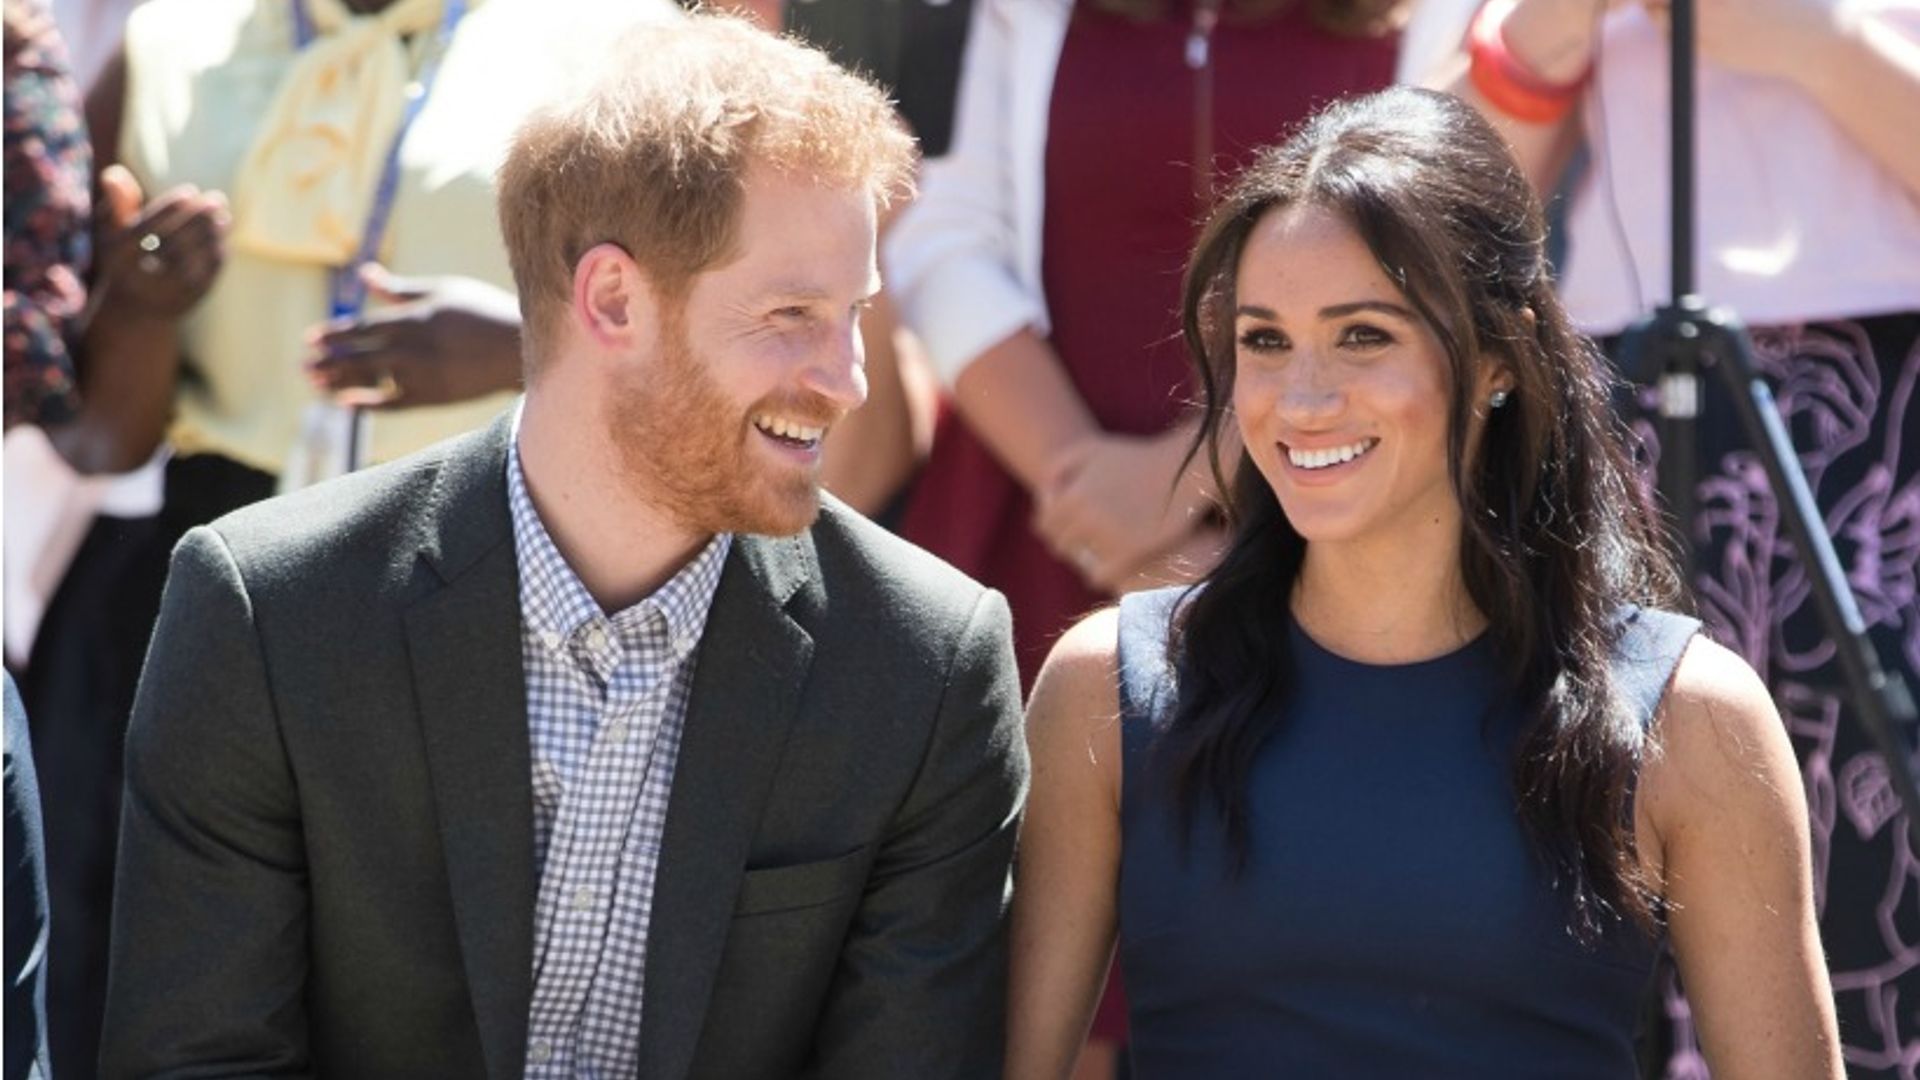 Meghan Markle just debuted a brand new hairstyle and we are loving it